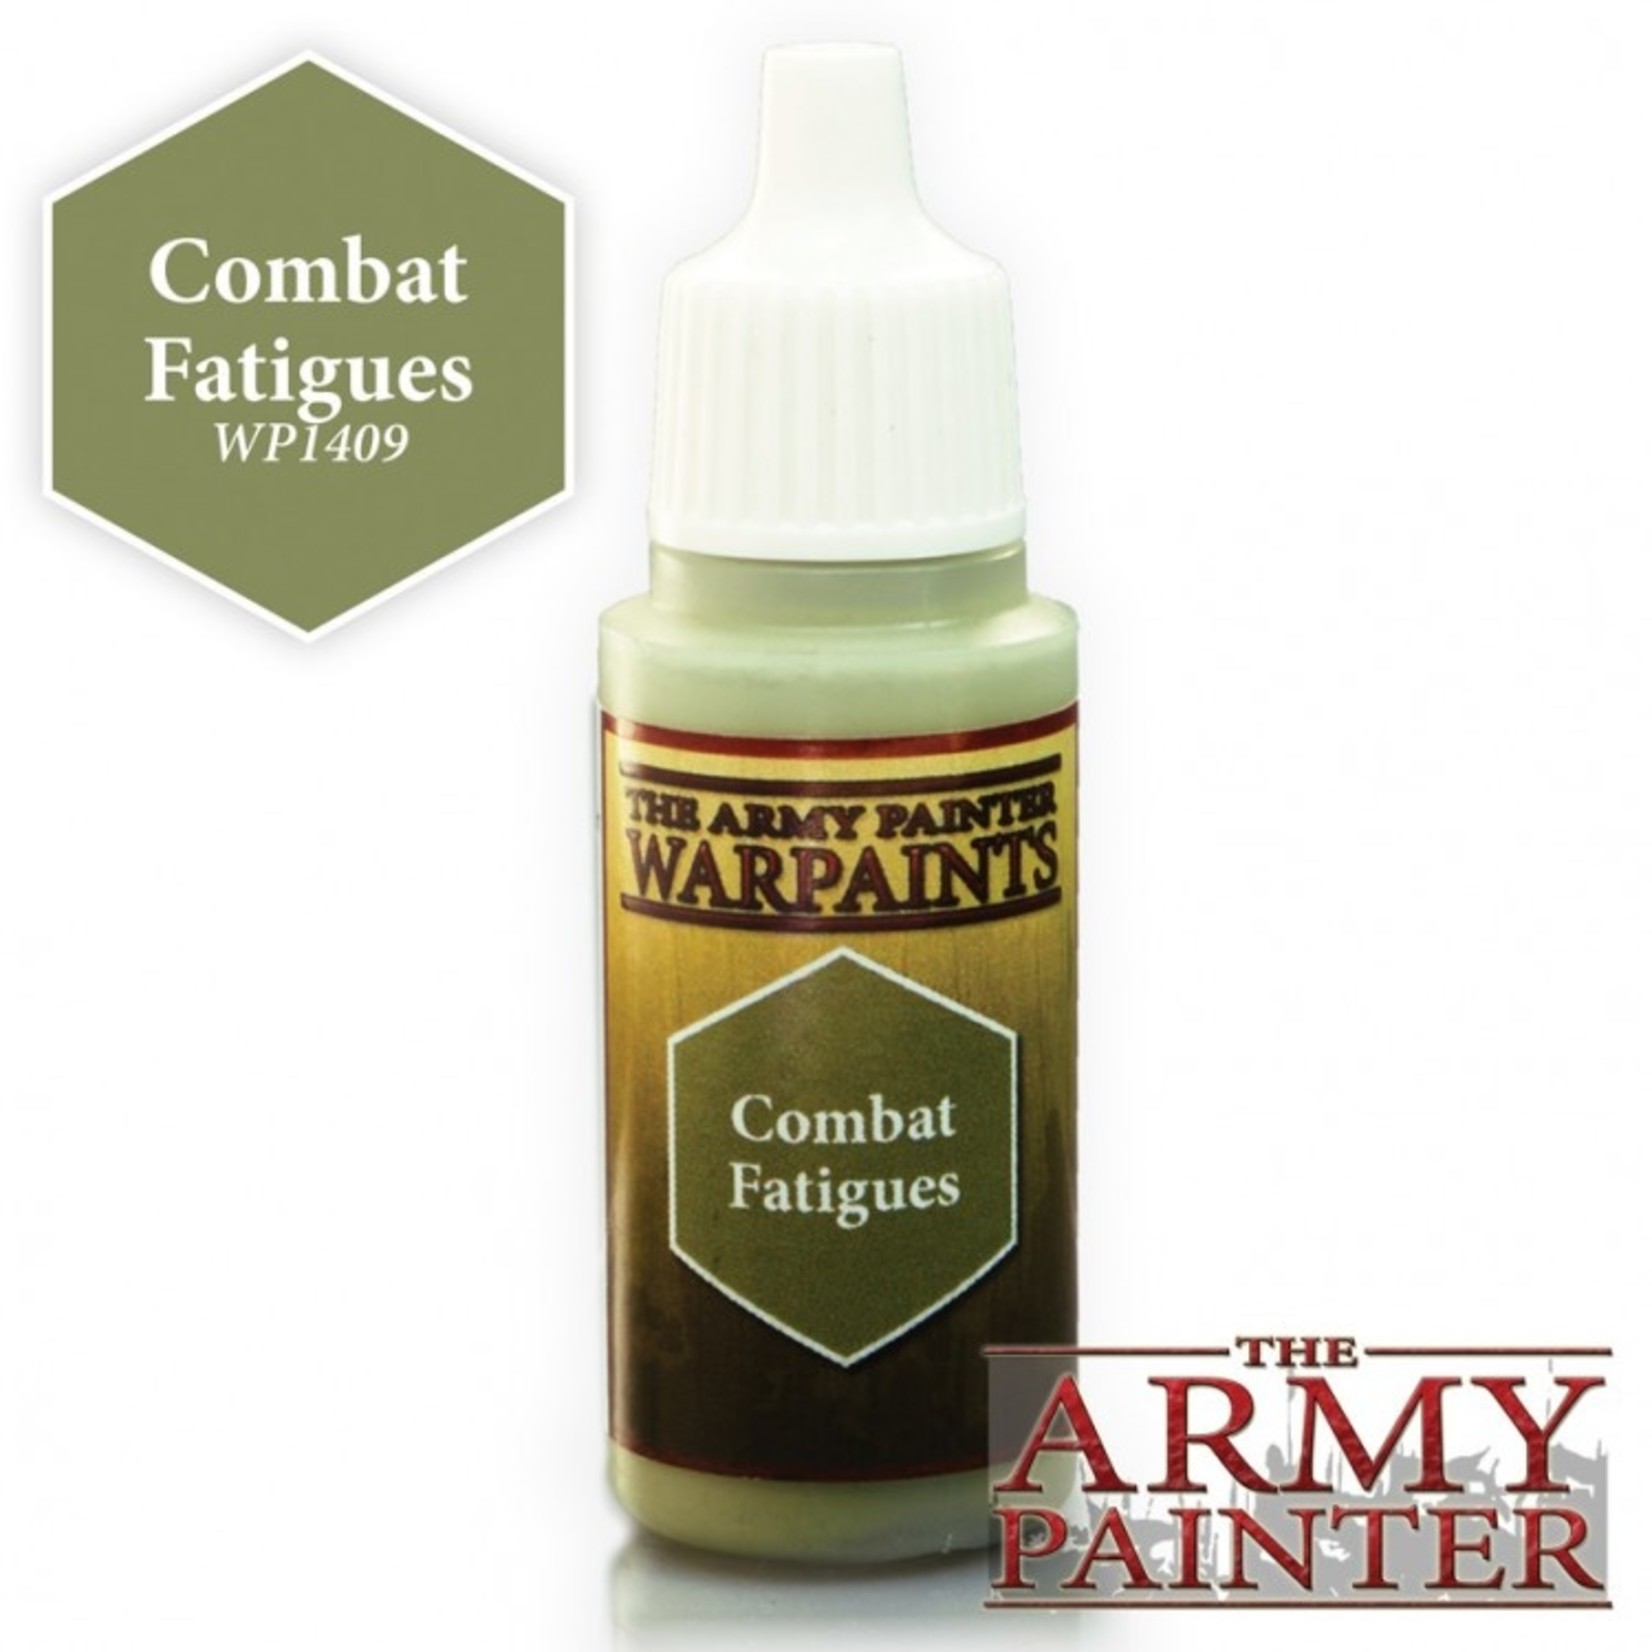 The Army Painter The Army Painter Combat Fatigues 18ml